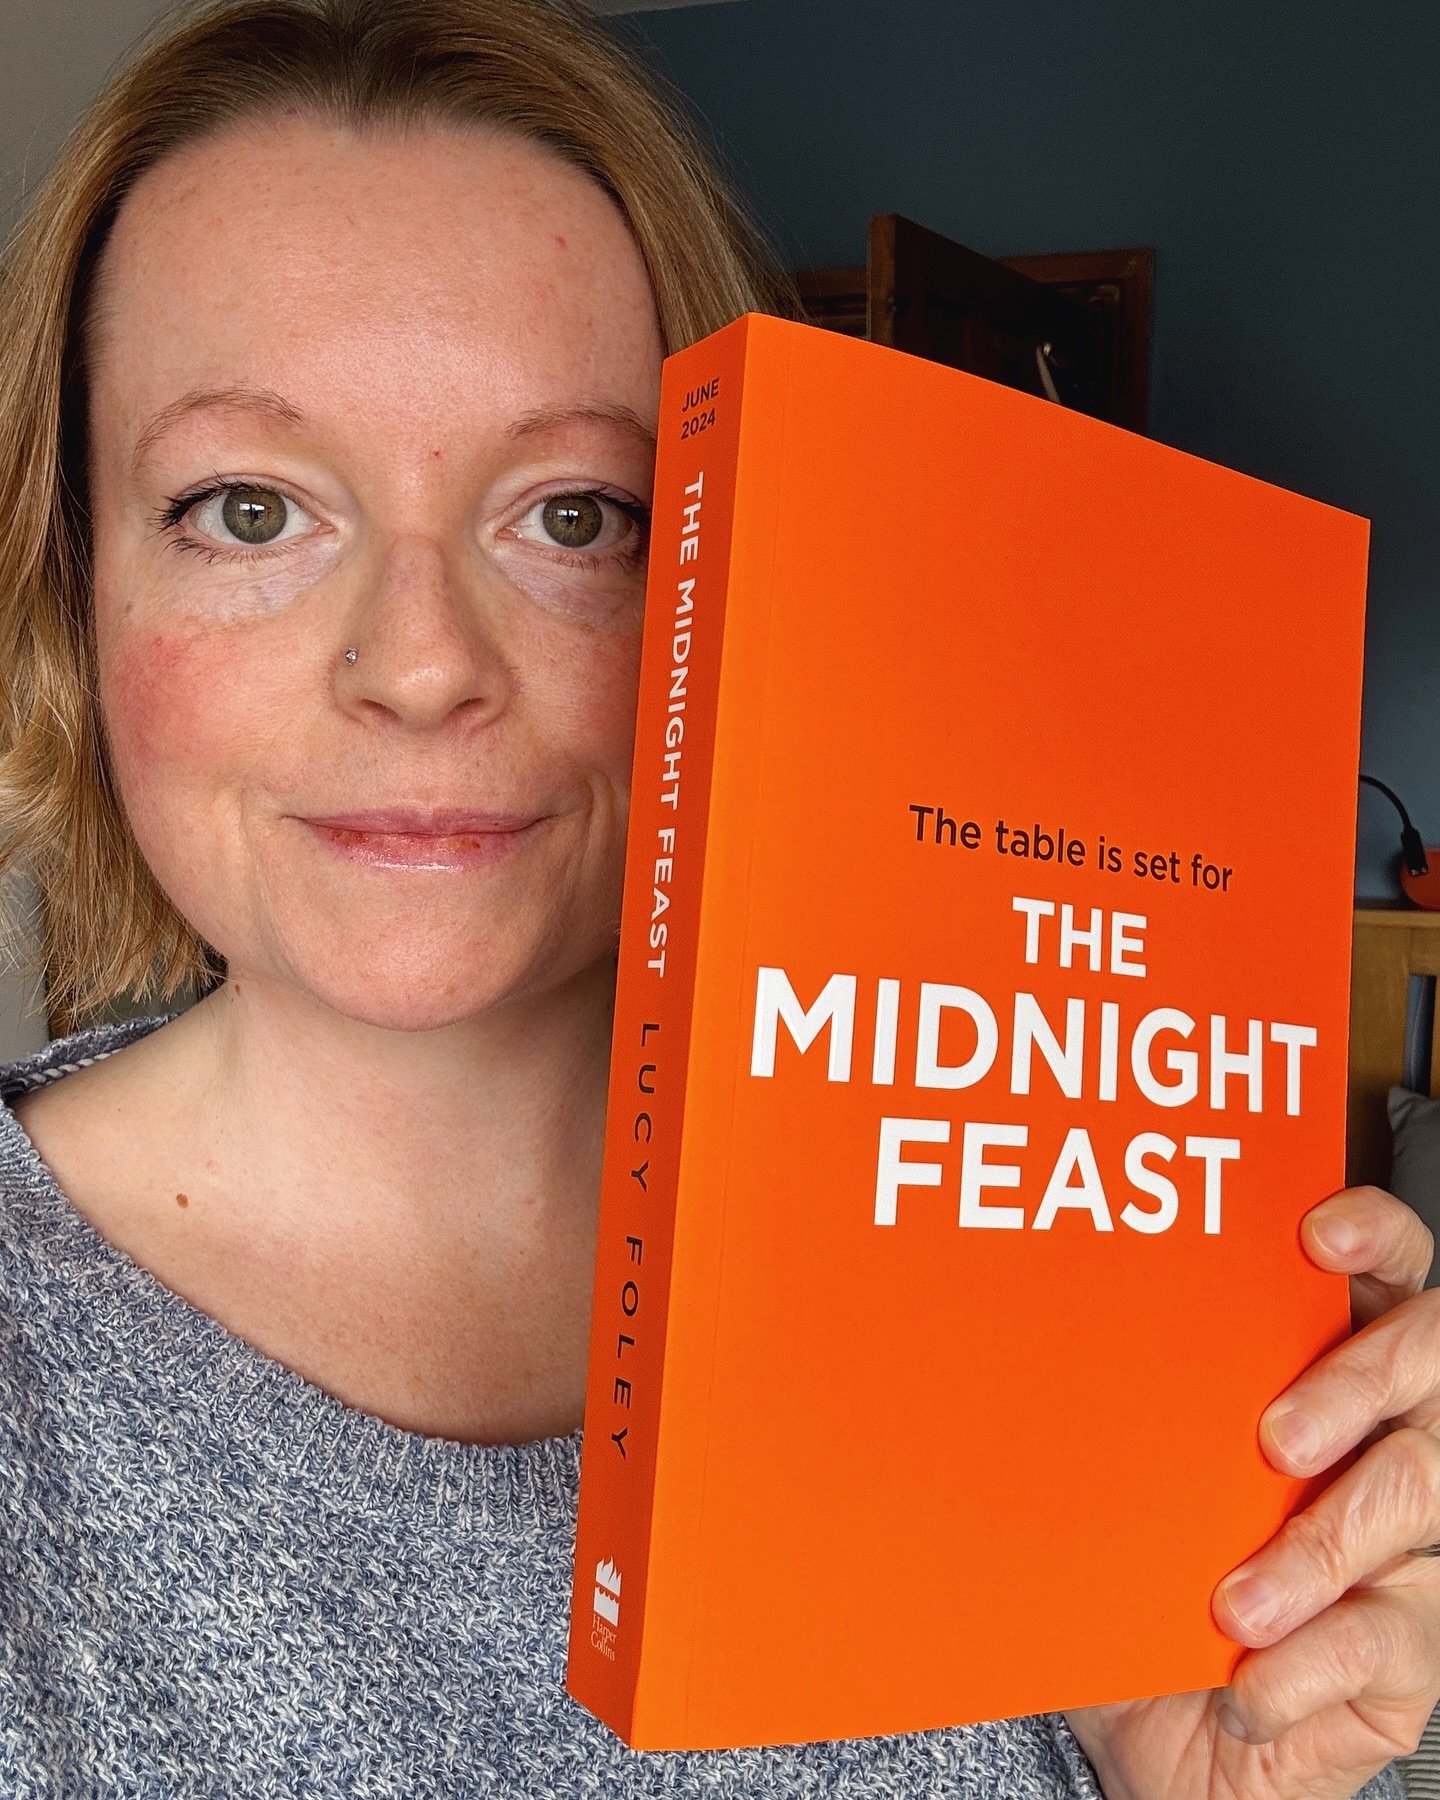 Hello. Have I mentioned before how much I love @lucyfoleyauthor? I LOVE her. Every time, I think she can&rsquo;t get better, and then she does!

The Midnight Feast is the most fun I have had reading a book in ages. It is a dark, twisty, funny and com